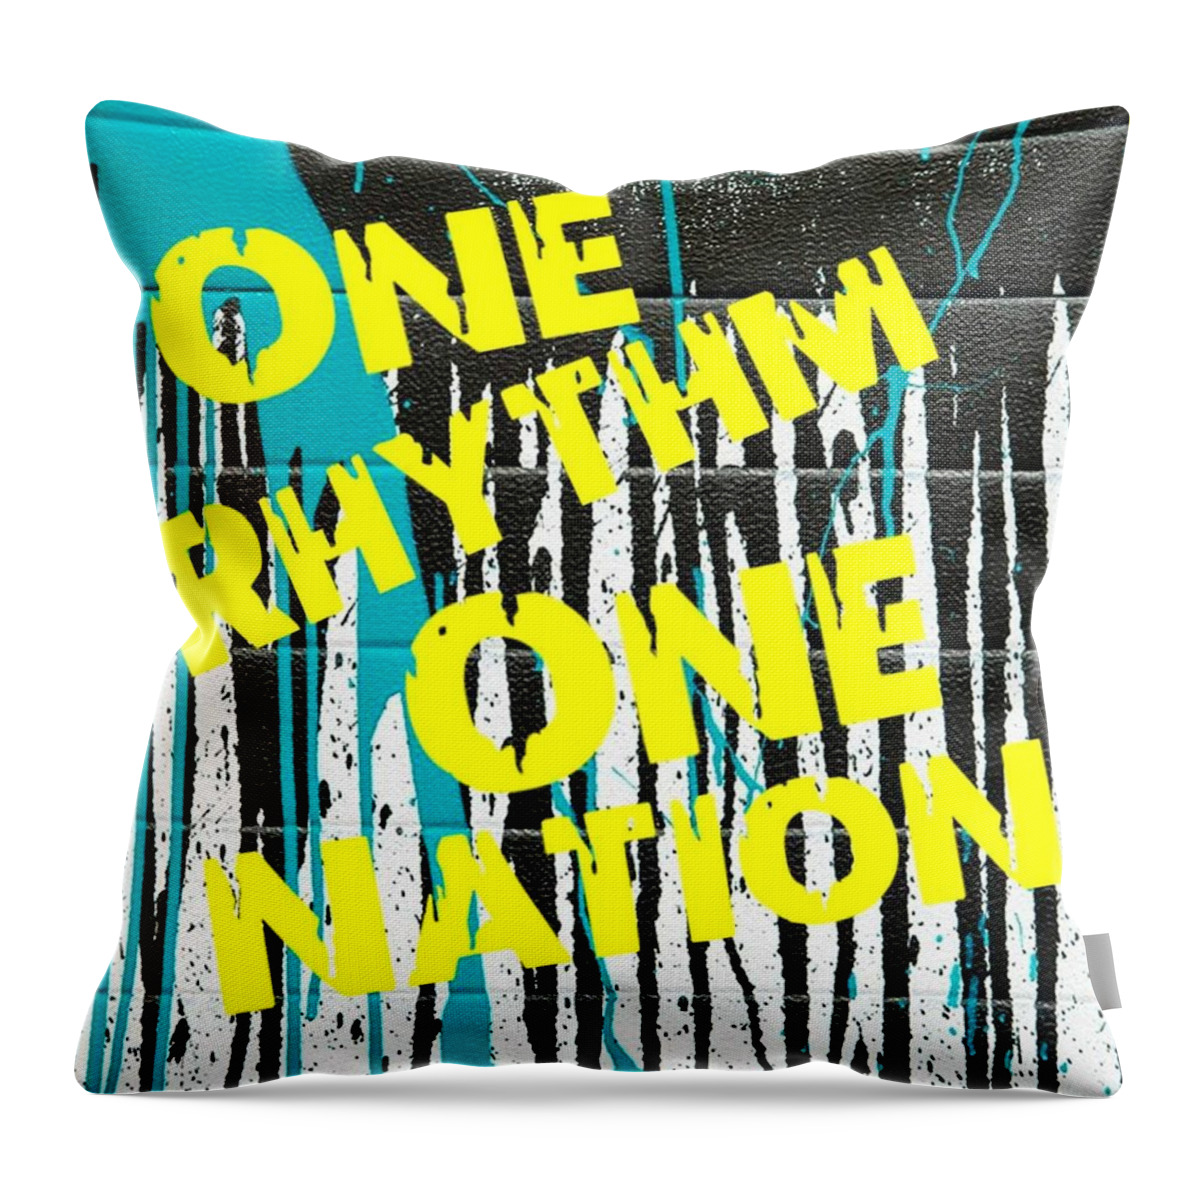  Throw Pillow featuring the digital art One Rhythm One Nation - Paint Can by Tony Camm